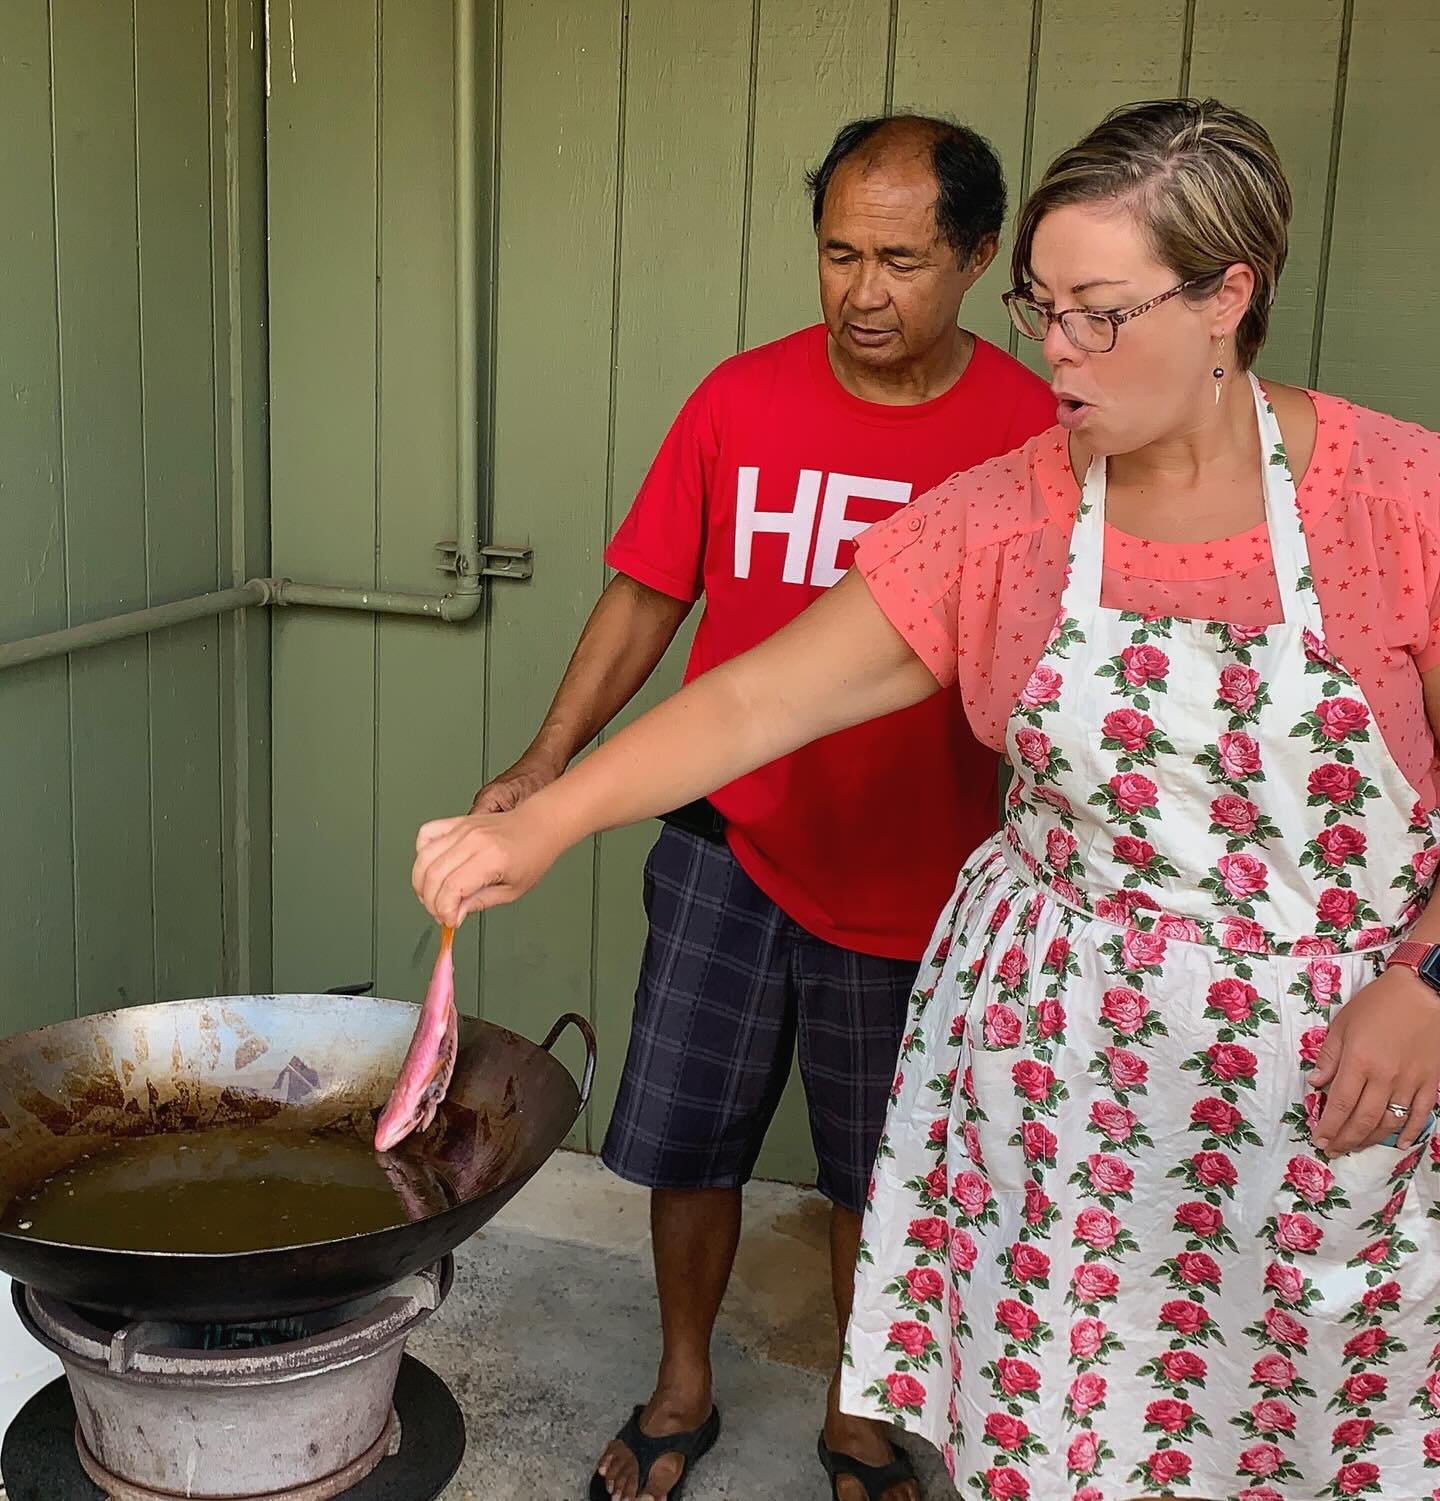 Did you know that our NSCF women had the opportunity to learn how to cook fish? It was one of the activities offered during a previous Ladies Summer Calendar of Events! 

Our Women&rsquo;s Ministry is currently working on this summer&rsquo;s calendar